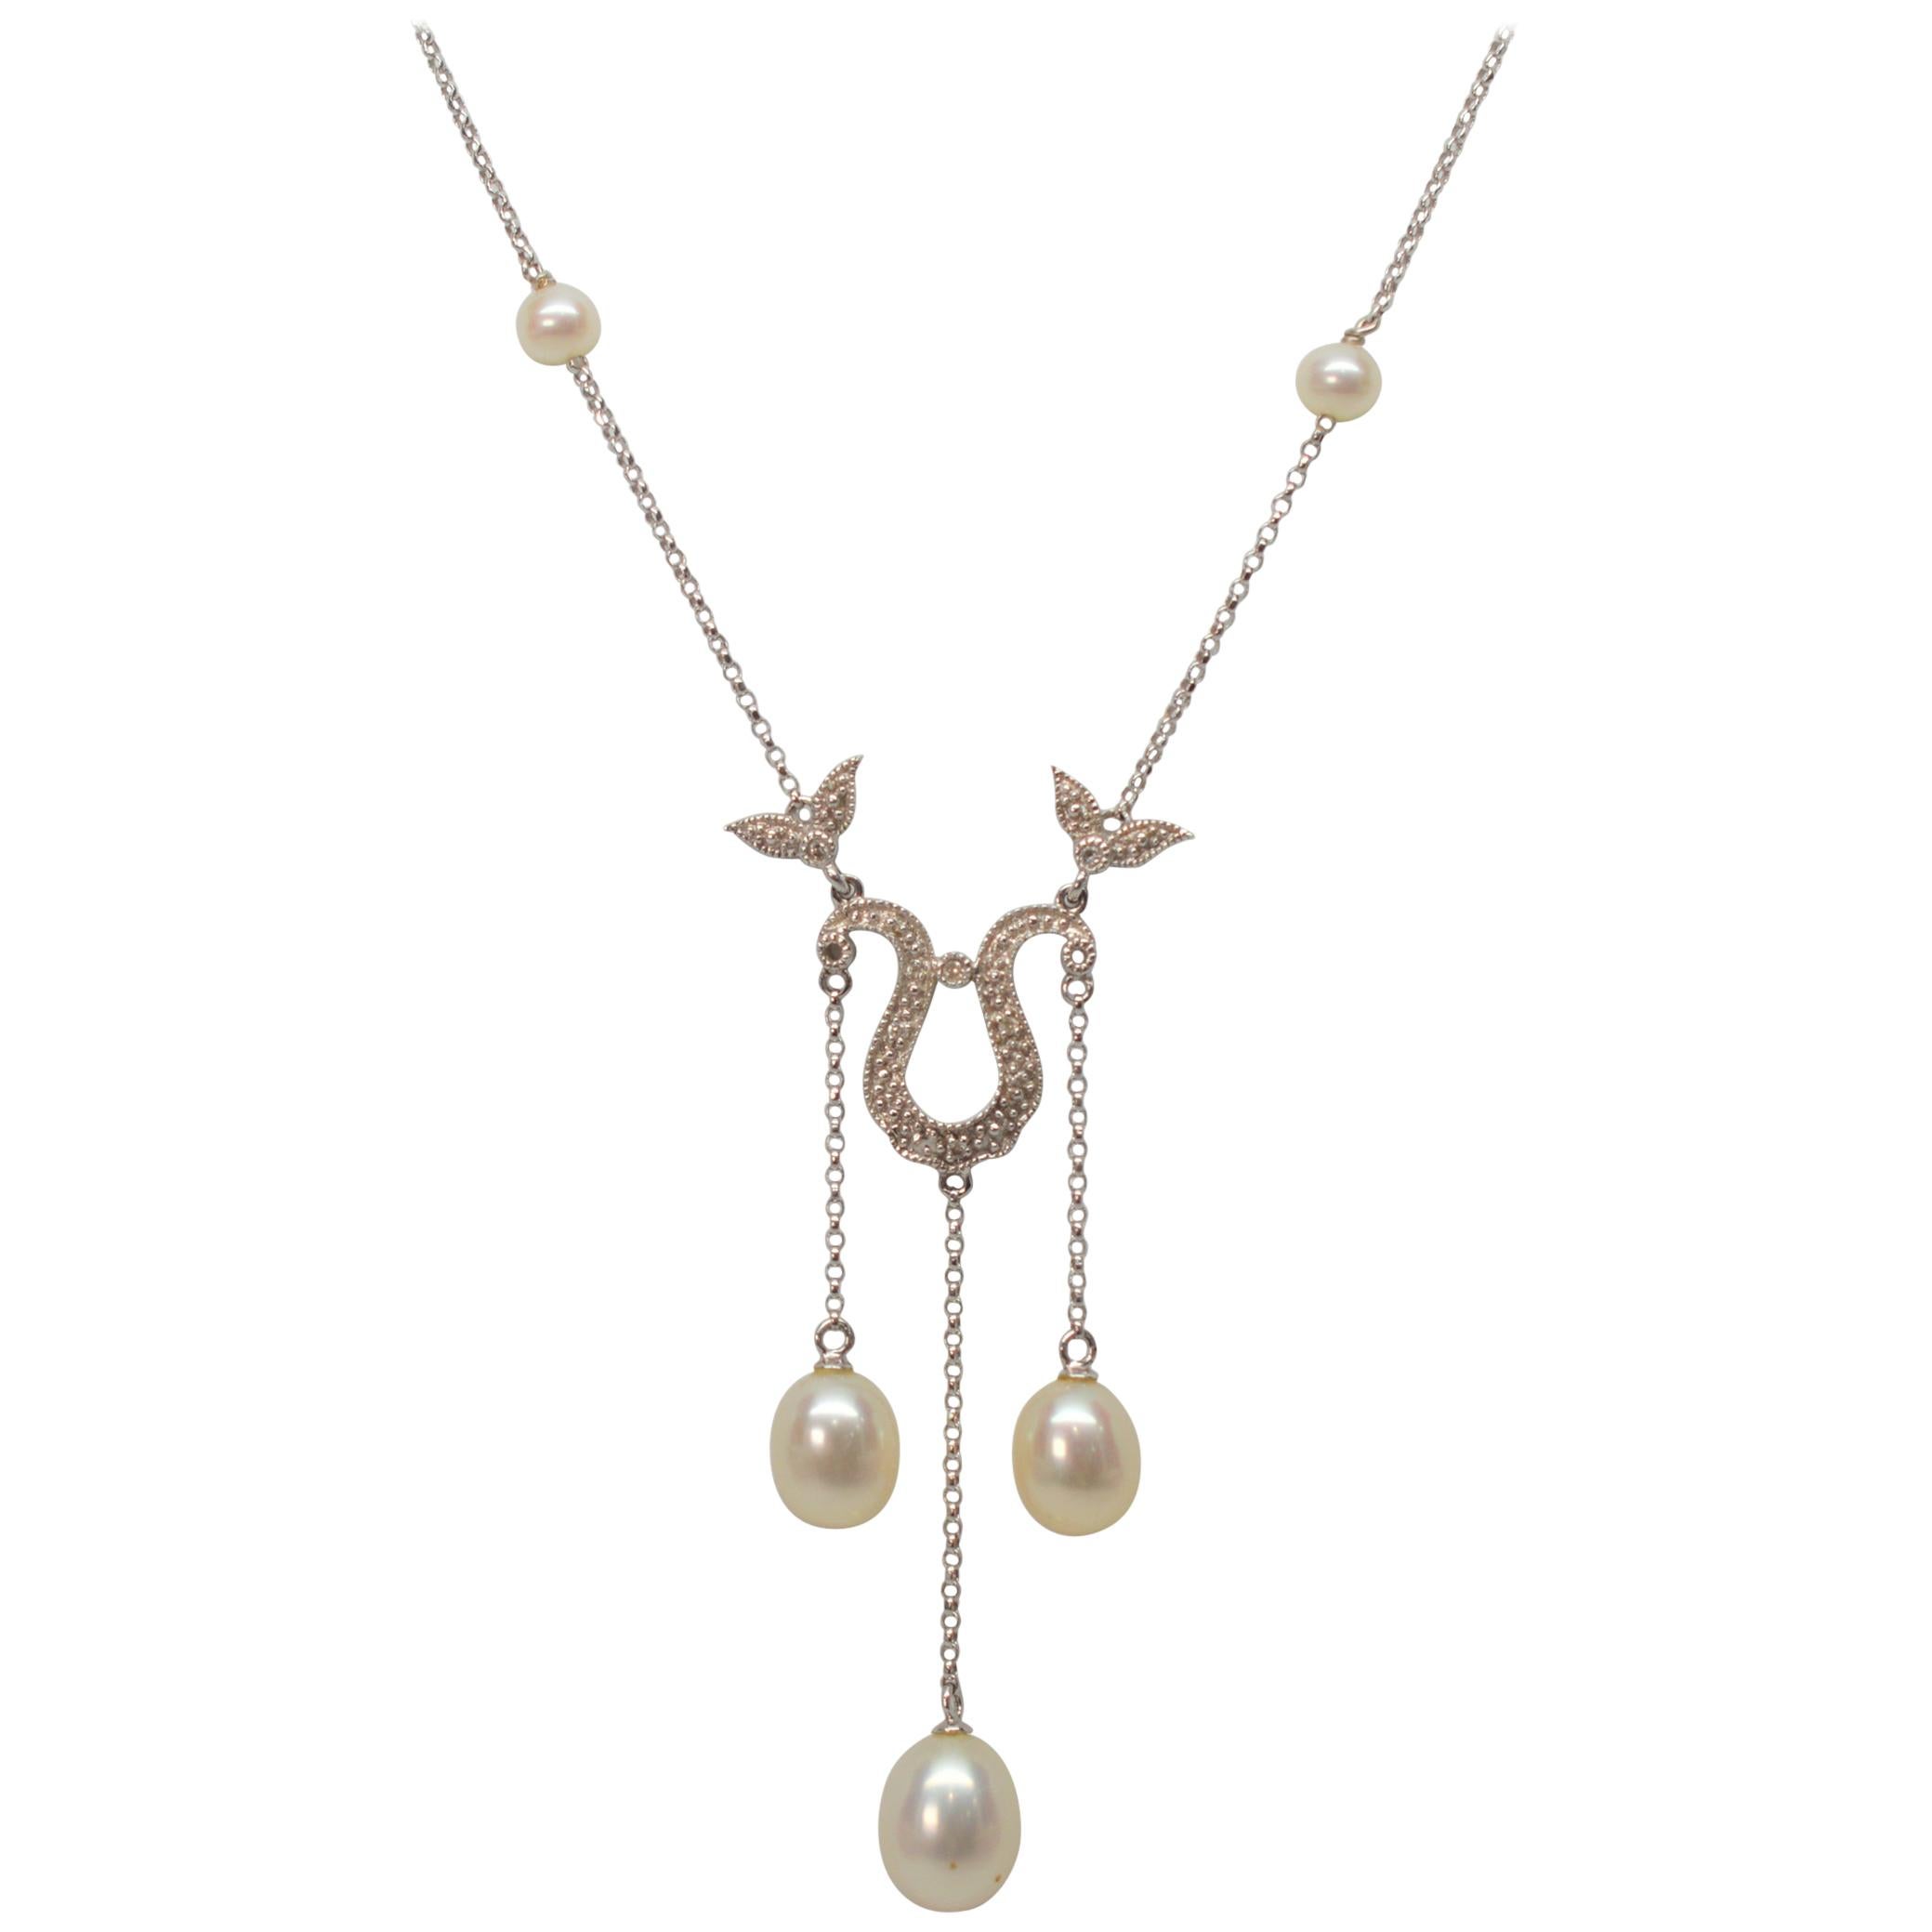 White Gold and Pearl Teardrop Pendant Necklace with Diamond Enhancements